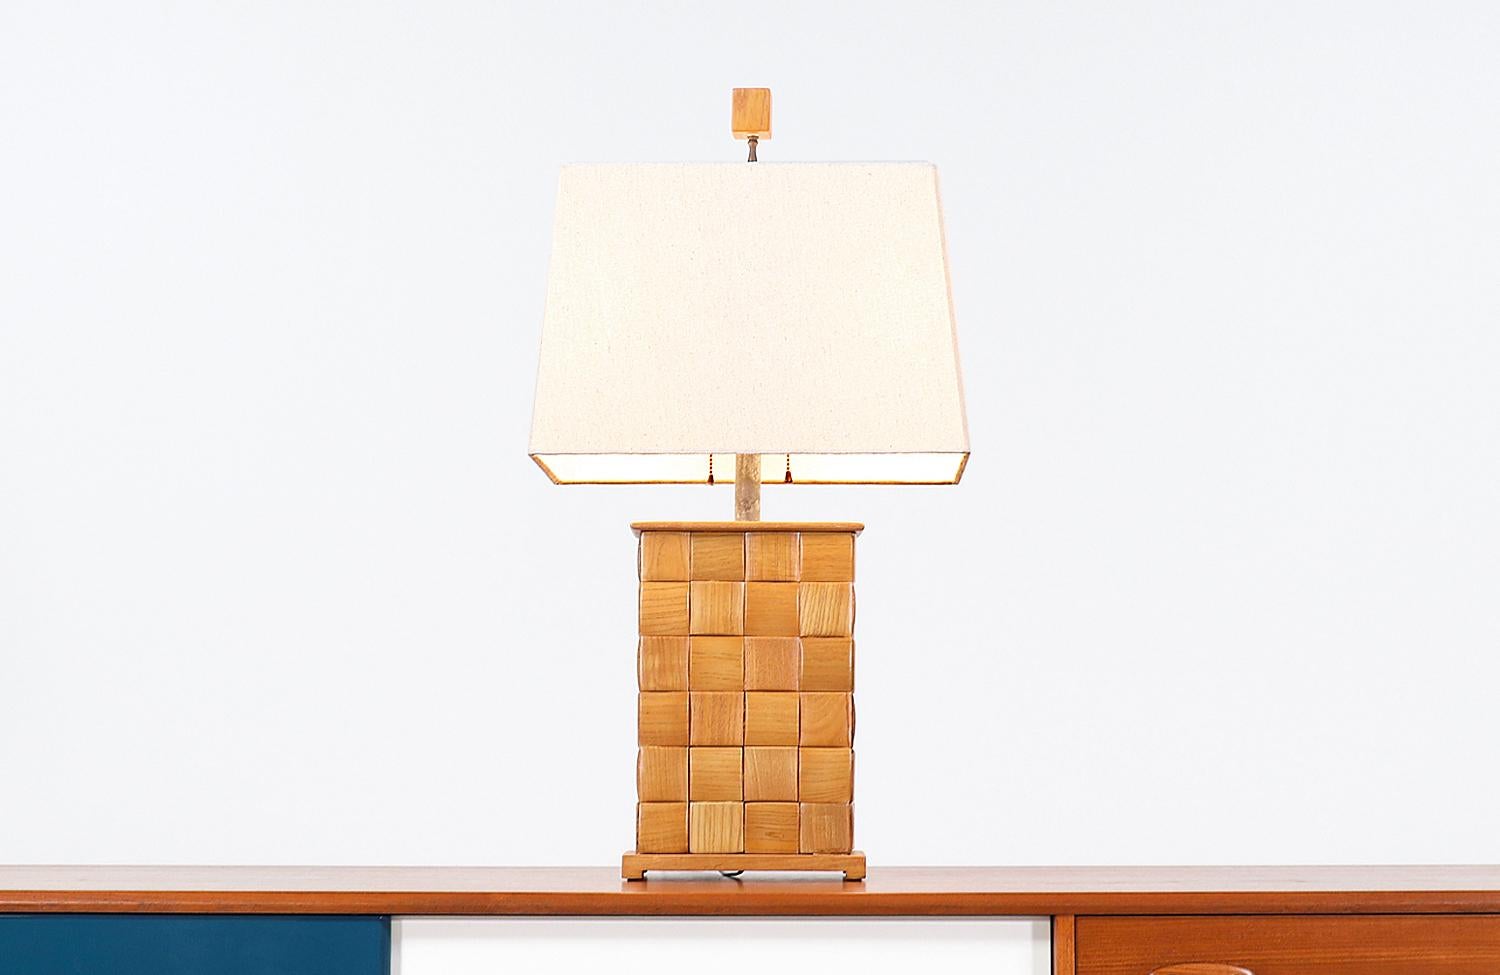 Rare Californian Modern table lamp designed by Paul Laszlo for Brown Saltman in the United States circa 1950s. This spectacular lamp features an oak wood body with Laszlo's signature chest pattern seen on his famous 